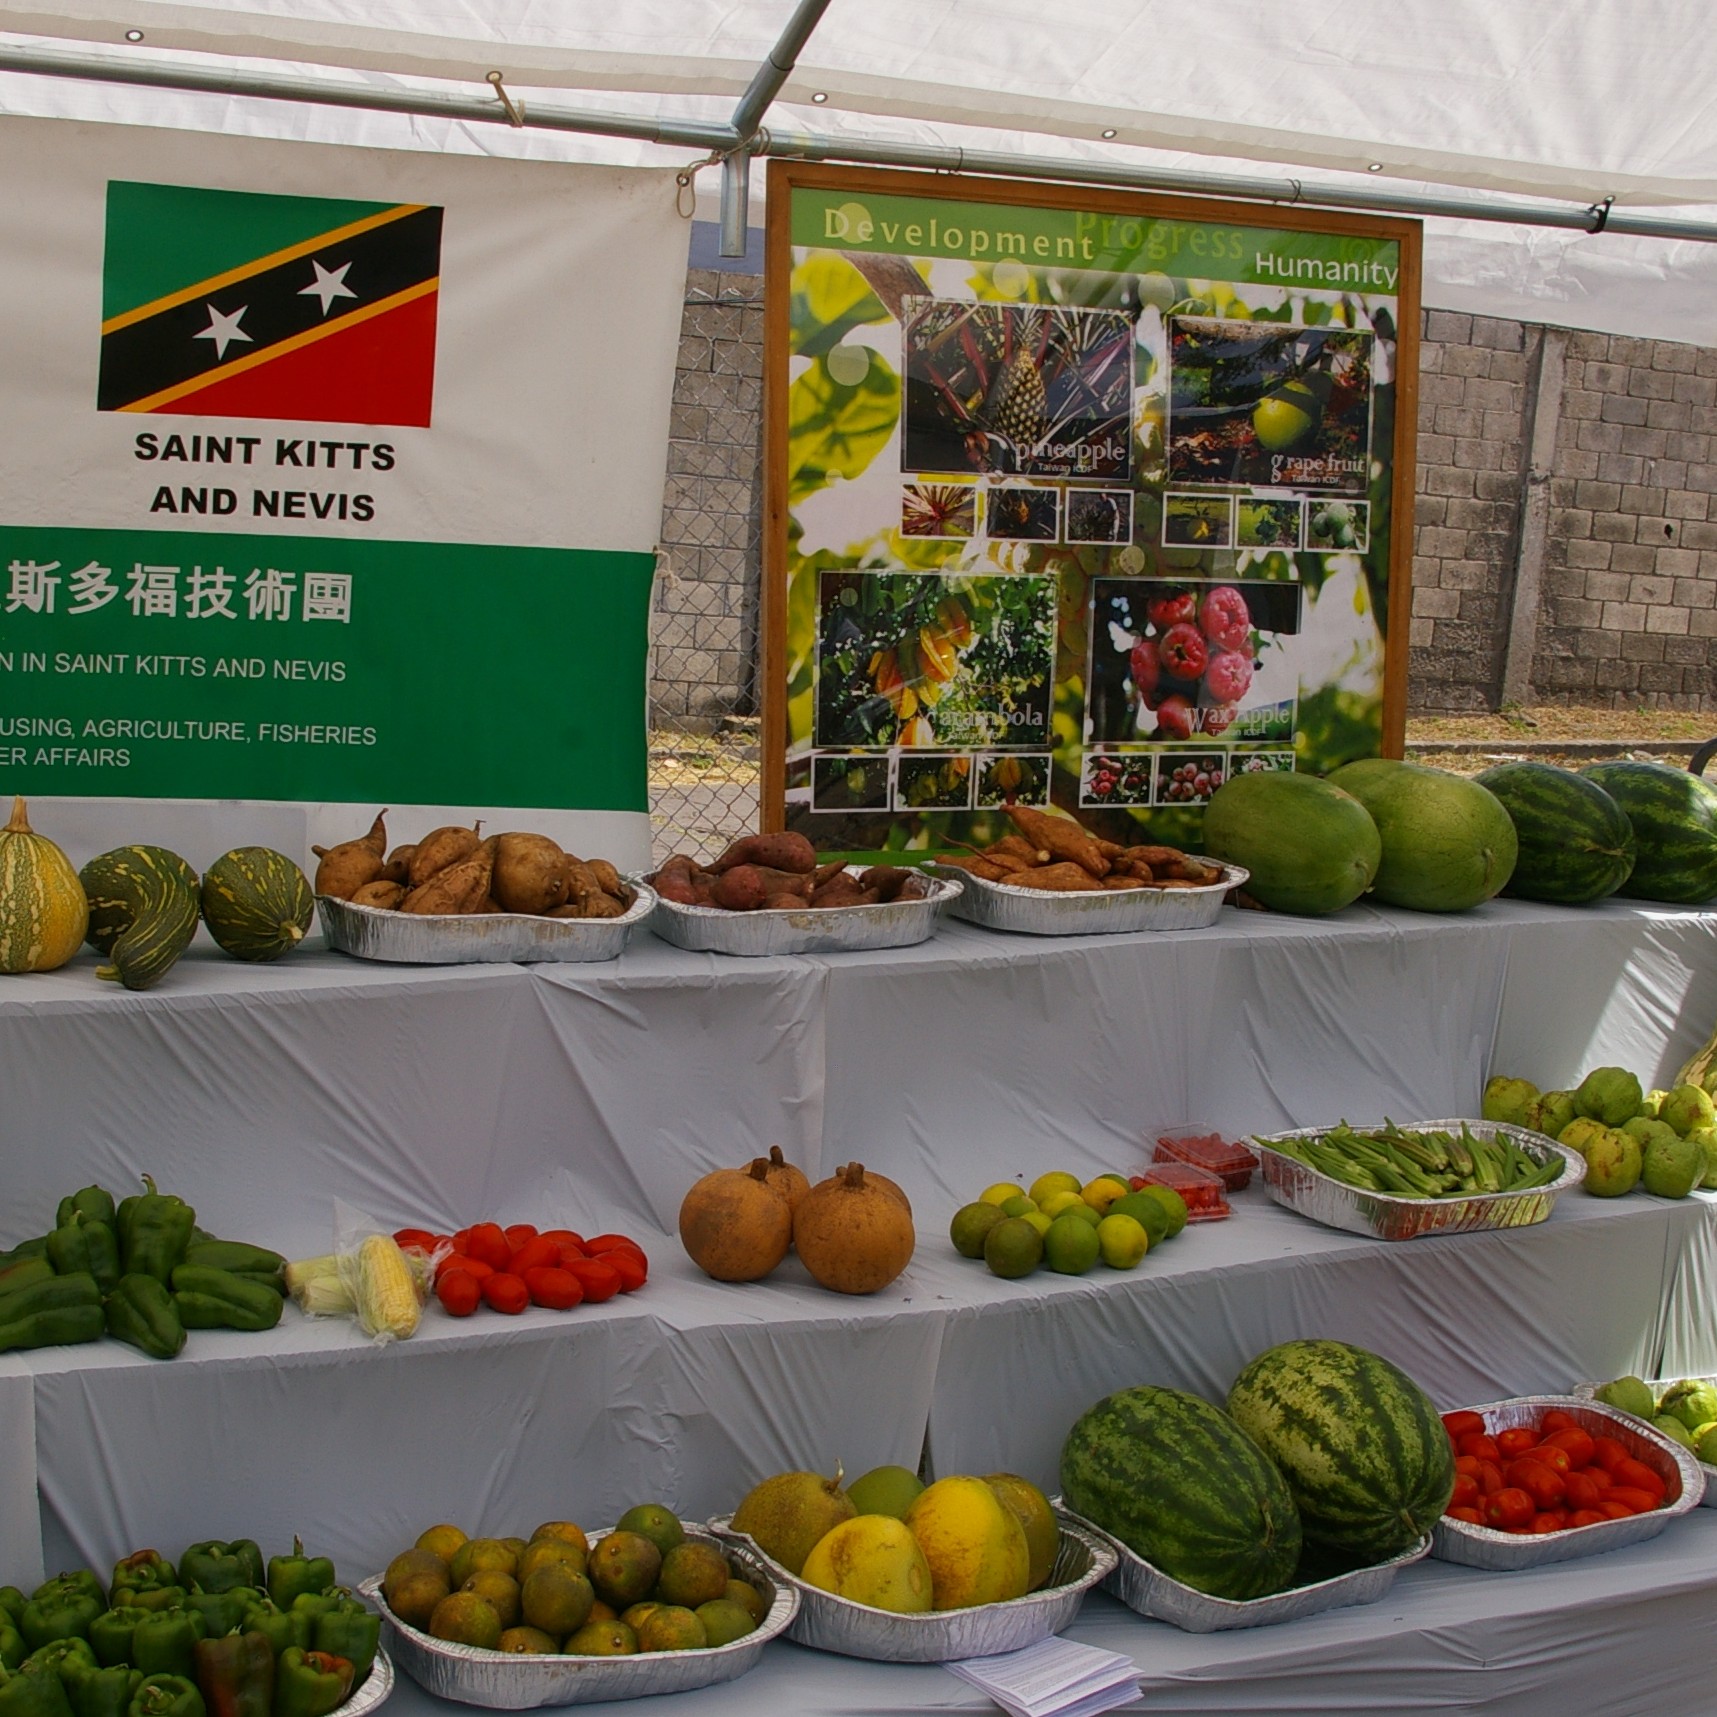 Nevis local products